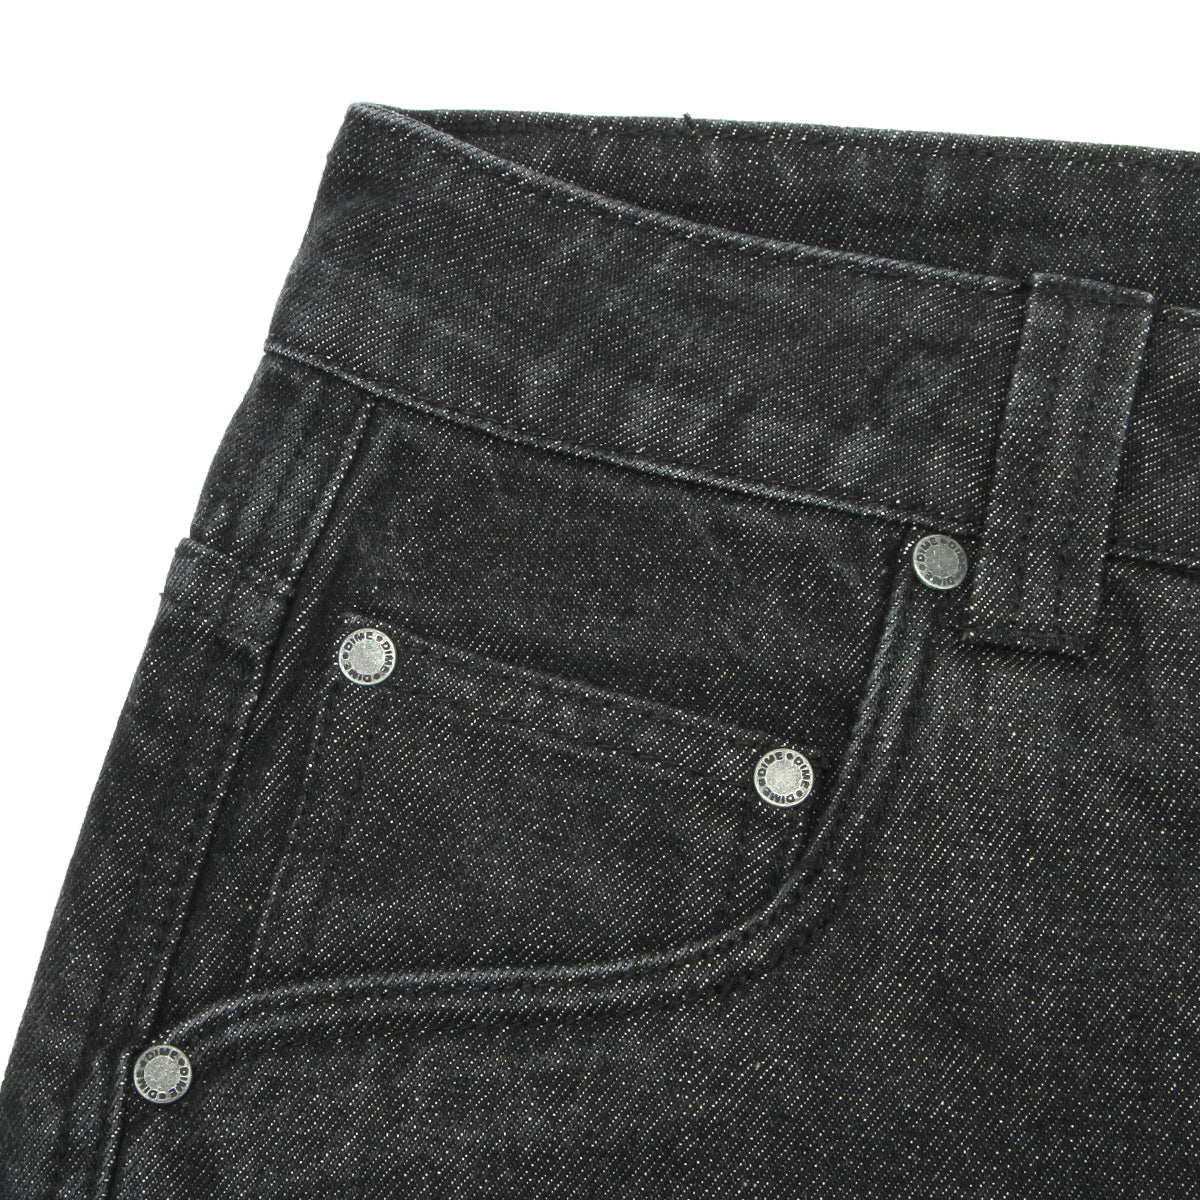 Dime Relaxed Denim Pants Black Washed